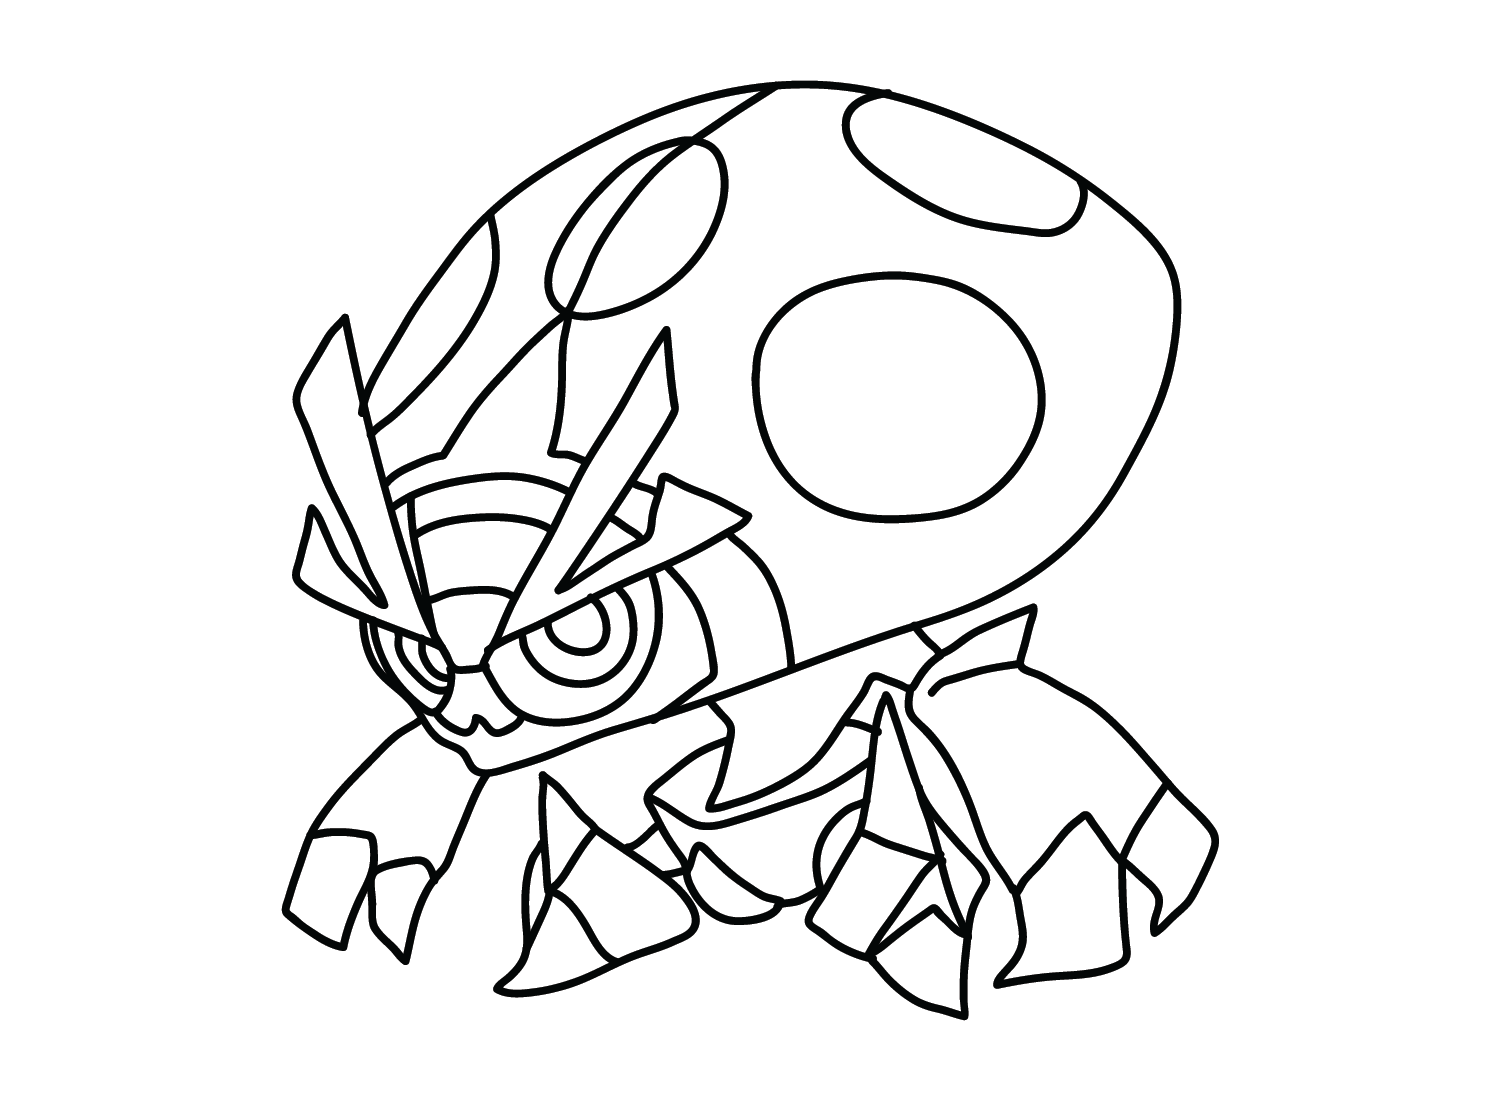 Pokemon Orbeetle Coloring Page